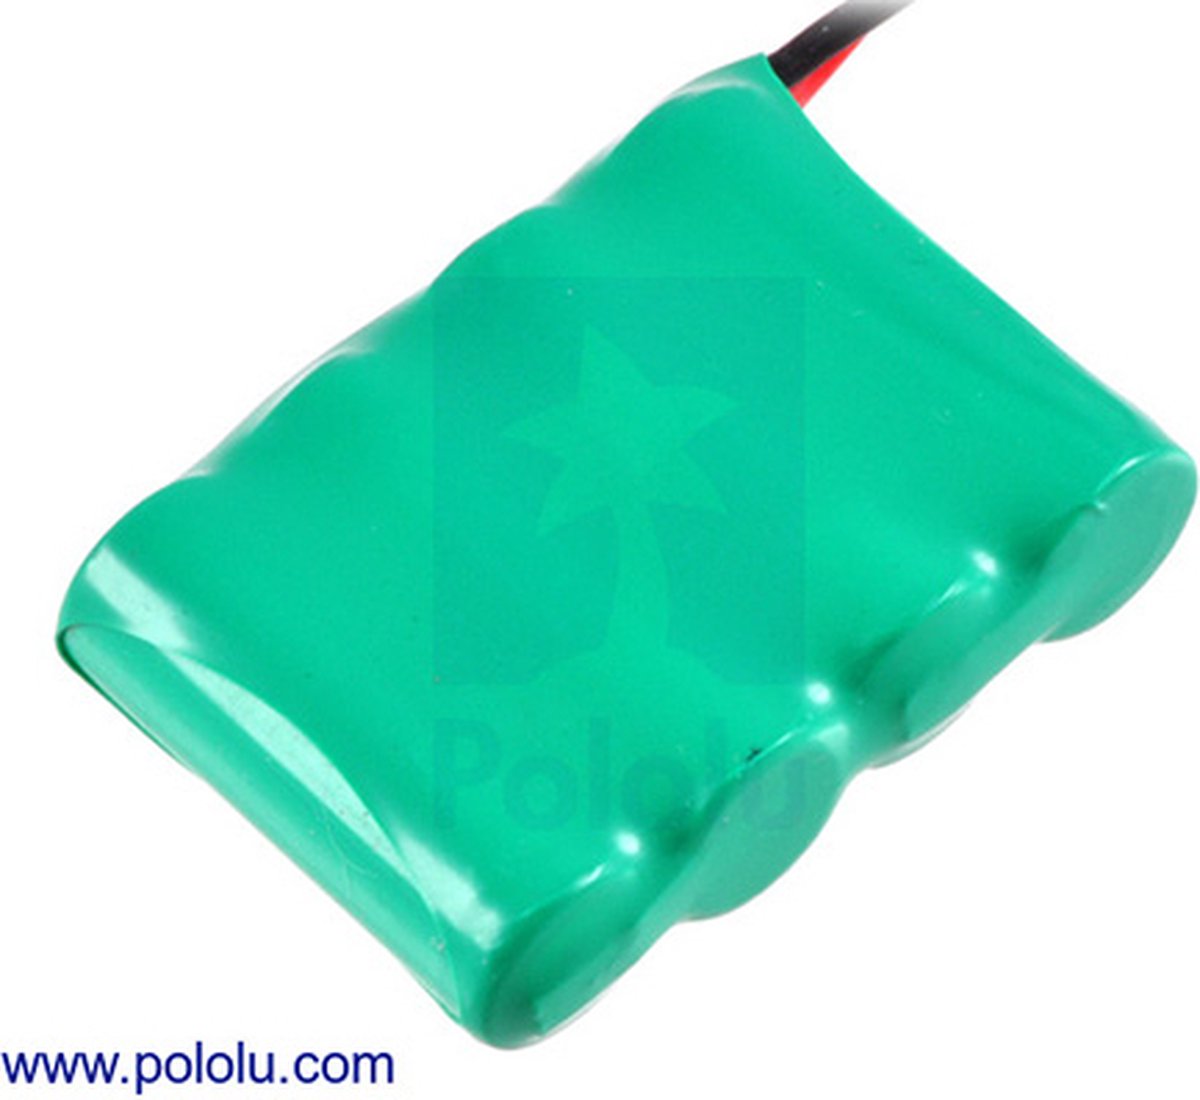 Rechargeable NiMH Battery Pack: 4.8V, 350mAh, 4x1 2/3-AAA Cells, JR Connector Pololu 2241